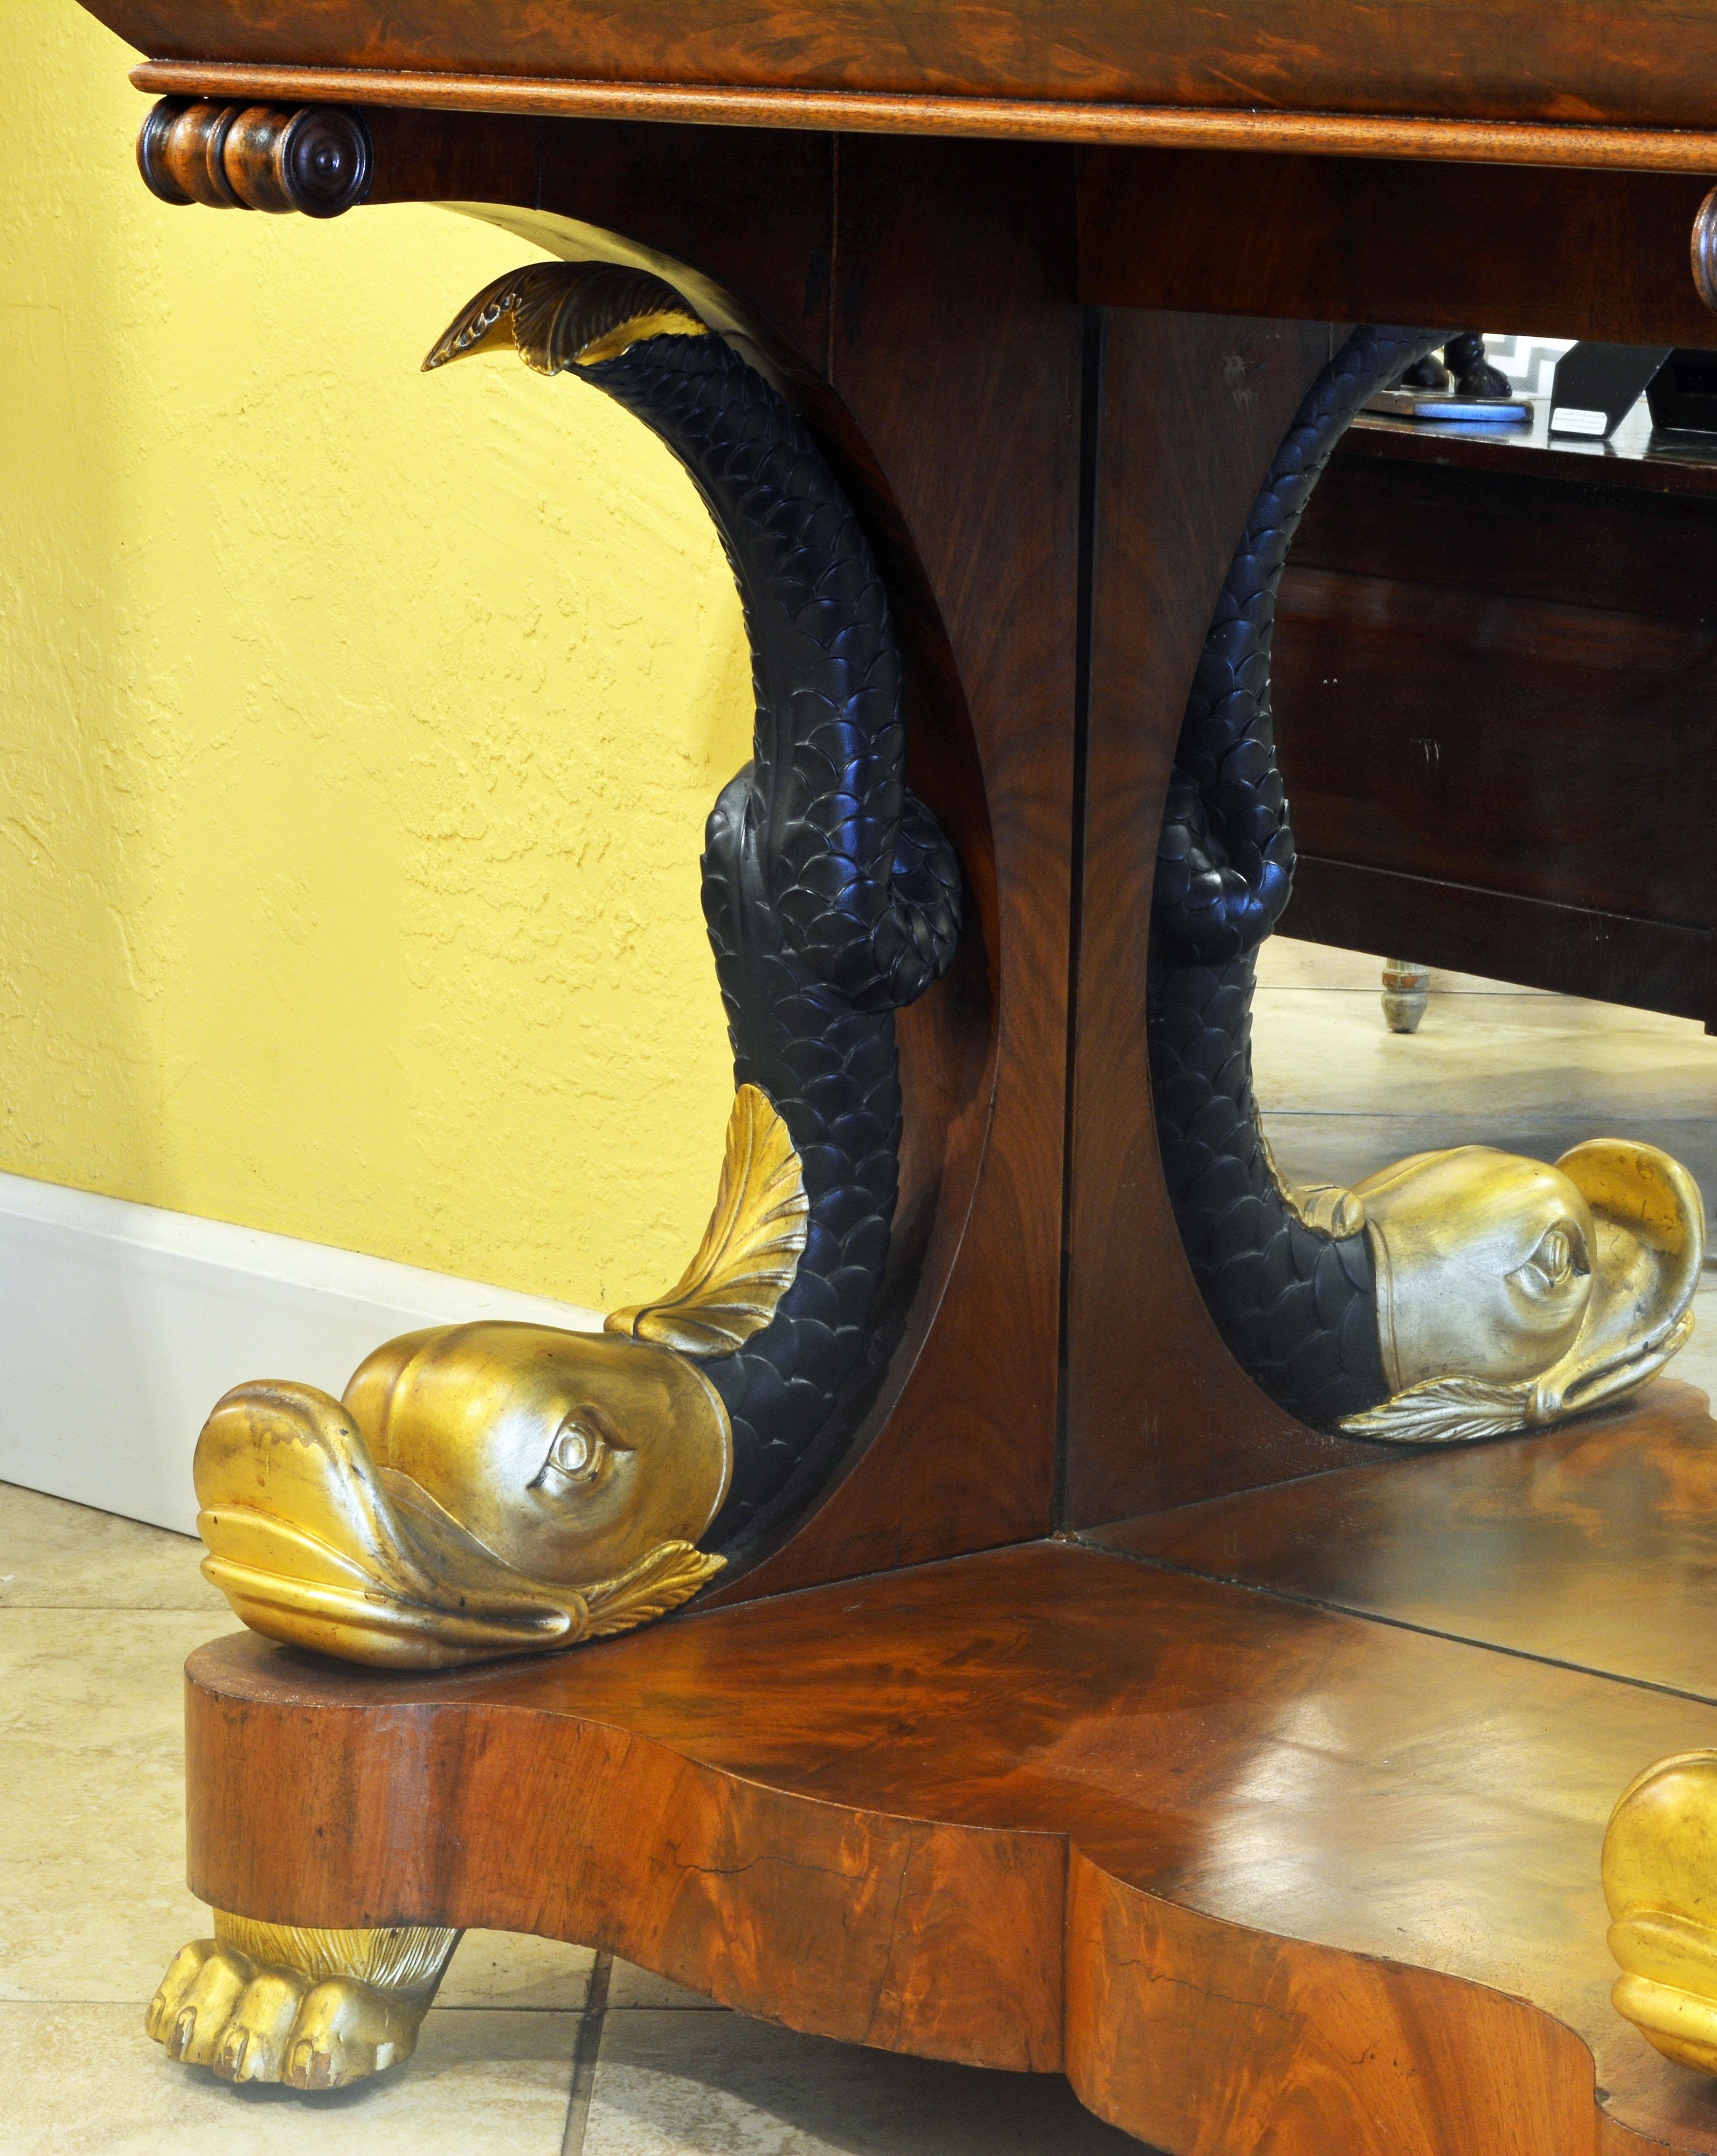 Mirror Mid-19th Century English Carved and Parcel Gilt Marble Top Dolphin Console Table